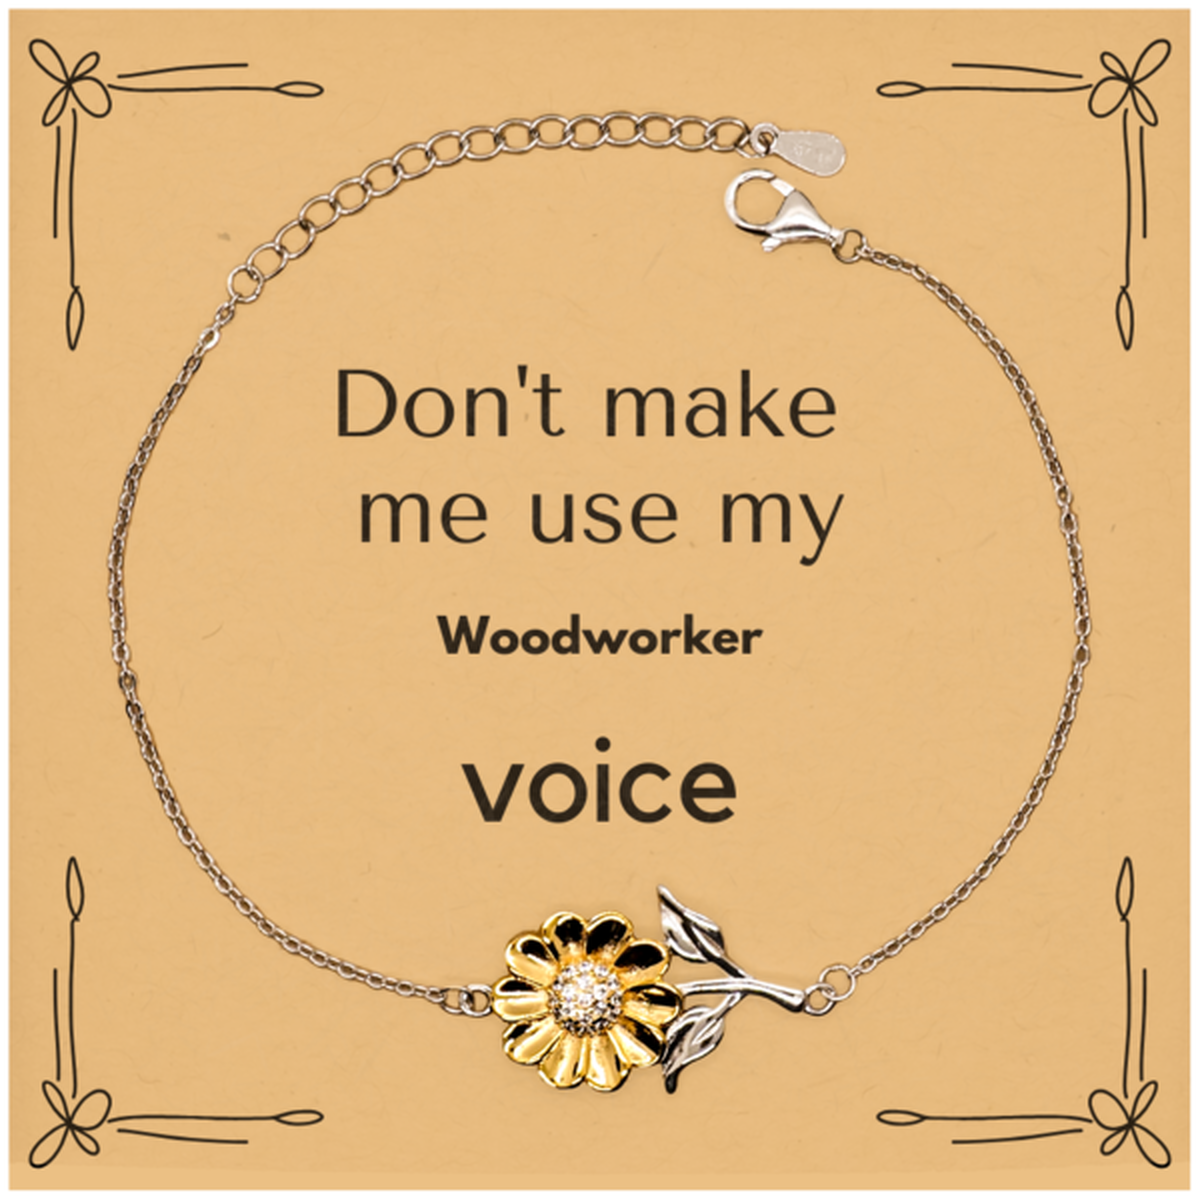 Don't make me use my Woodworker voice, Sarcasm Woodworker Card Gifts, Christmas Woodworker Sunflower Bracelet Birthday Unique Gifts For Woodworker Coworkers, Men, Women, Colleague, Friends